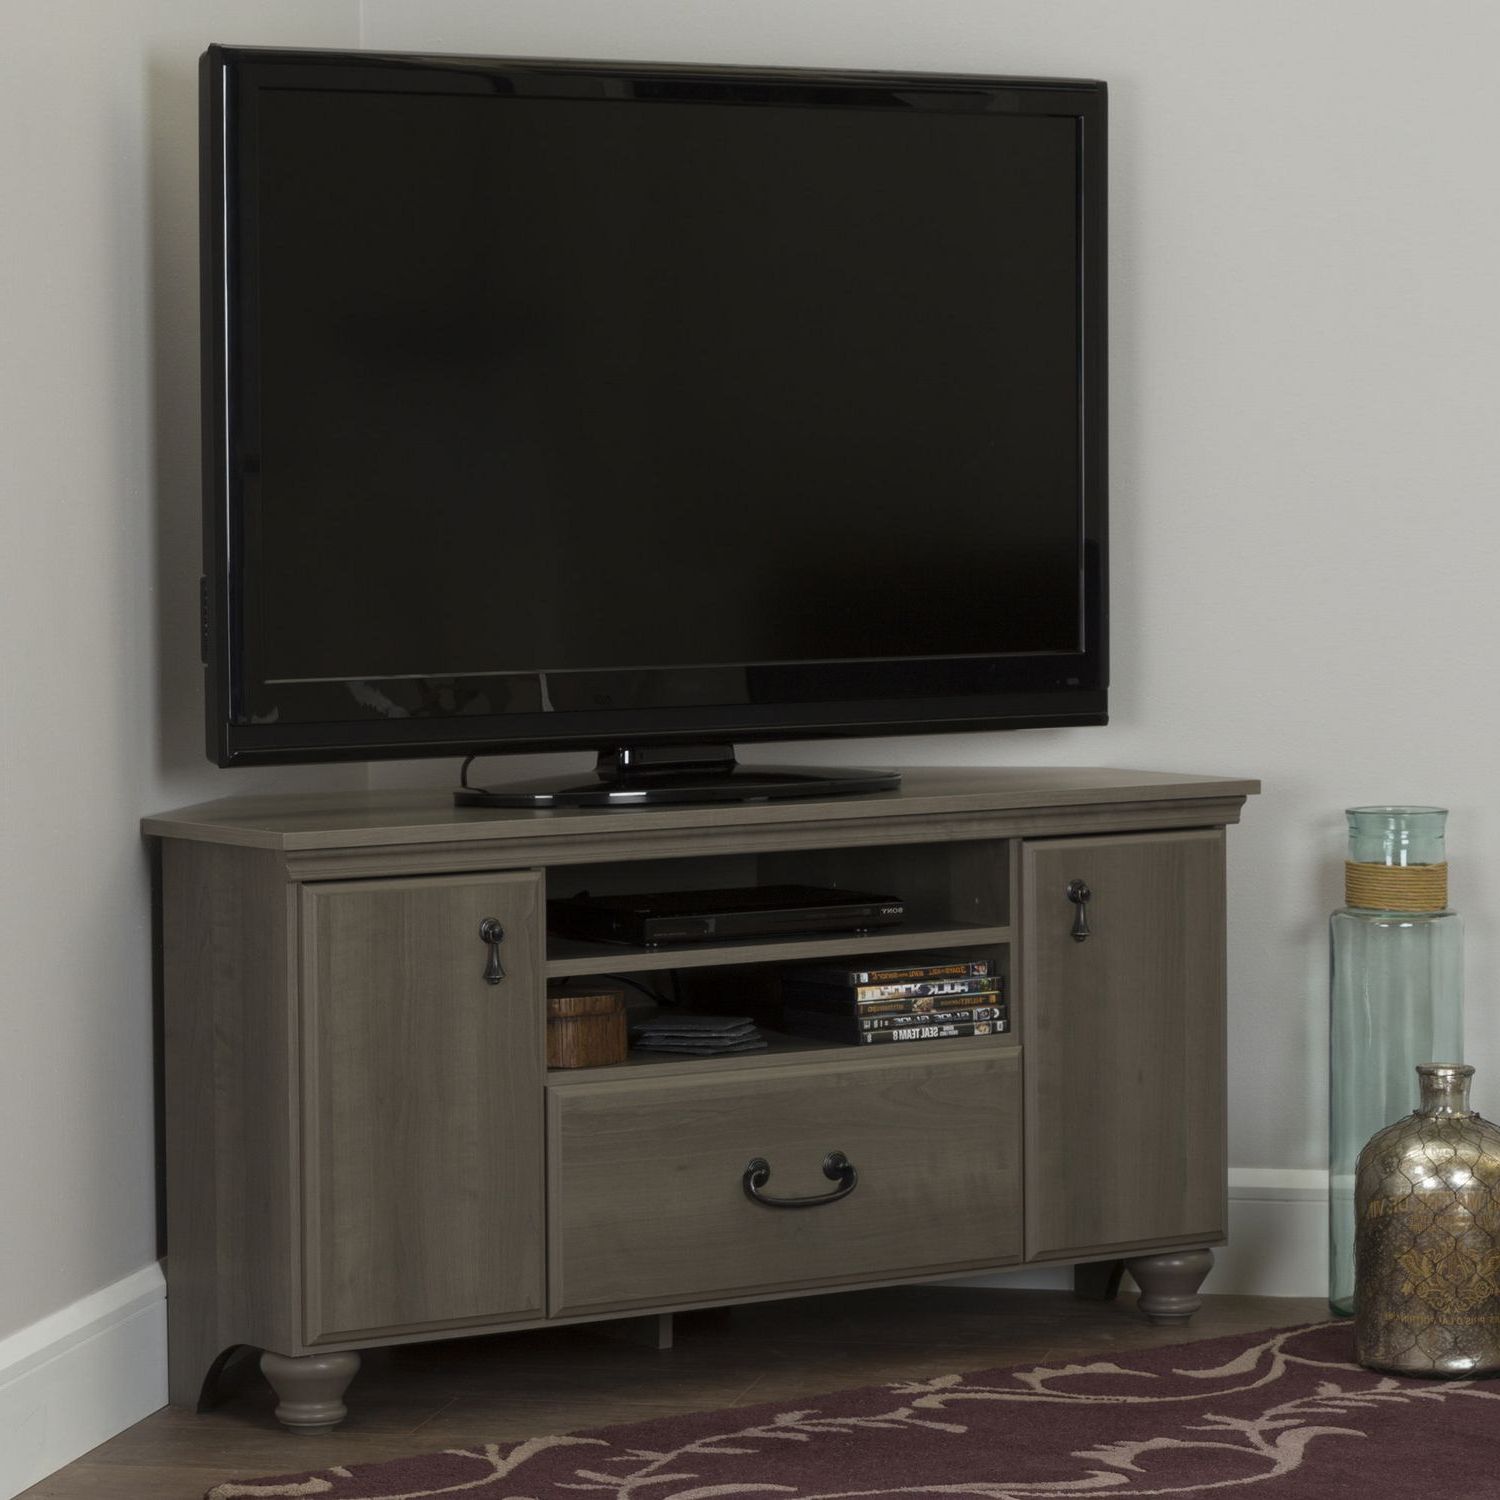 Fashionable Camden Corner Tv Stands For Tvs Up To 60" Intended For South Shore Noble Corner Tv Stand For Tv's Up To 60 Inches (Photo 6 of 10)